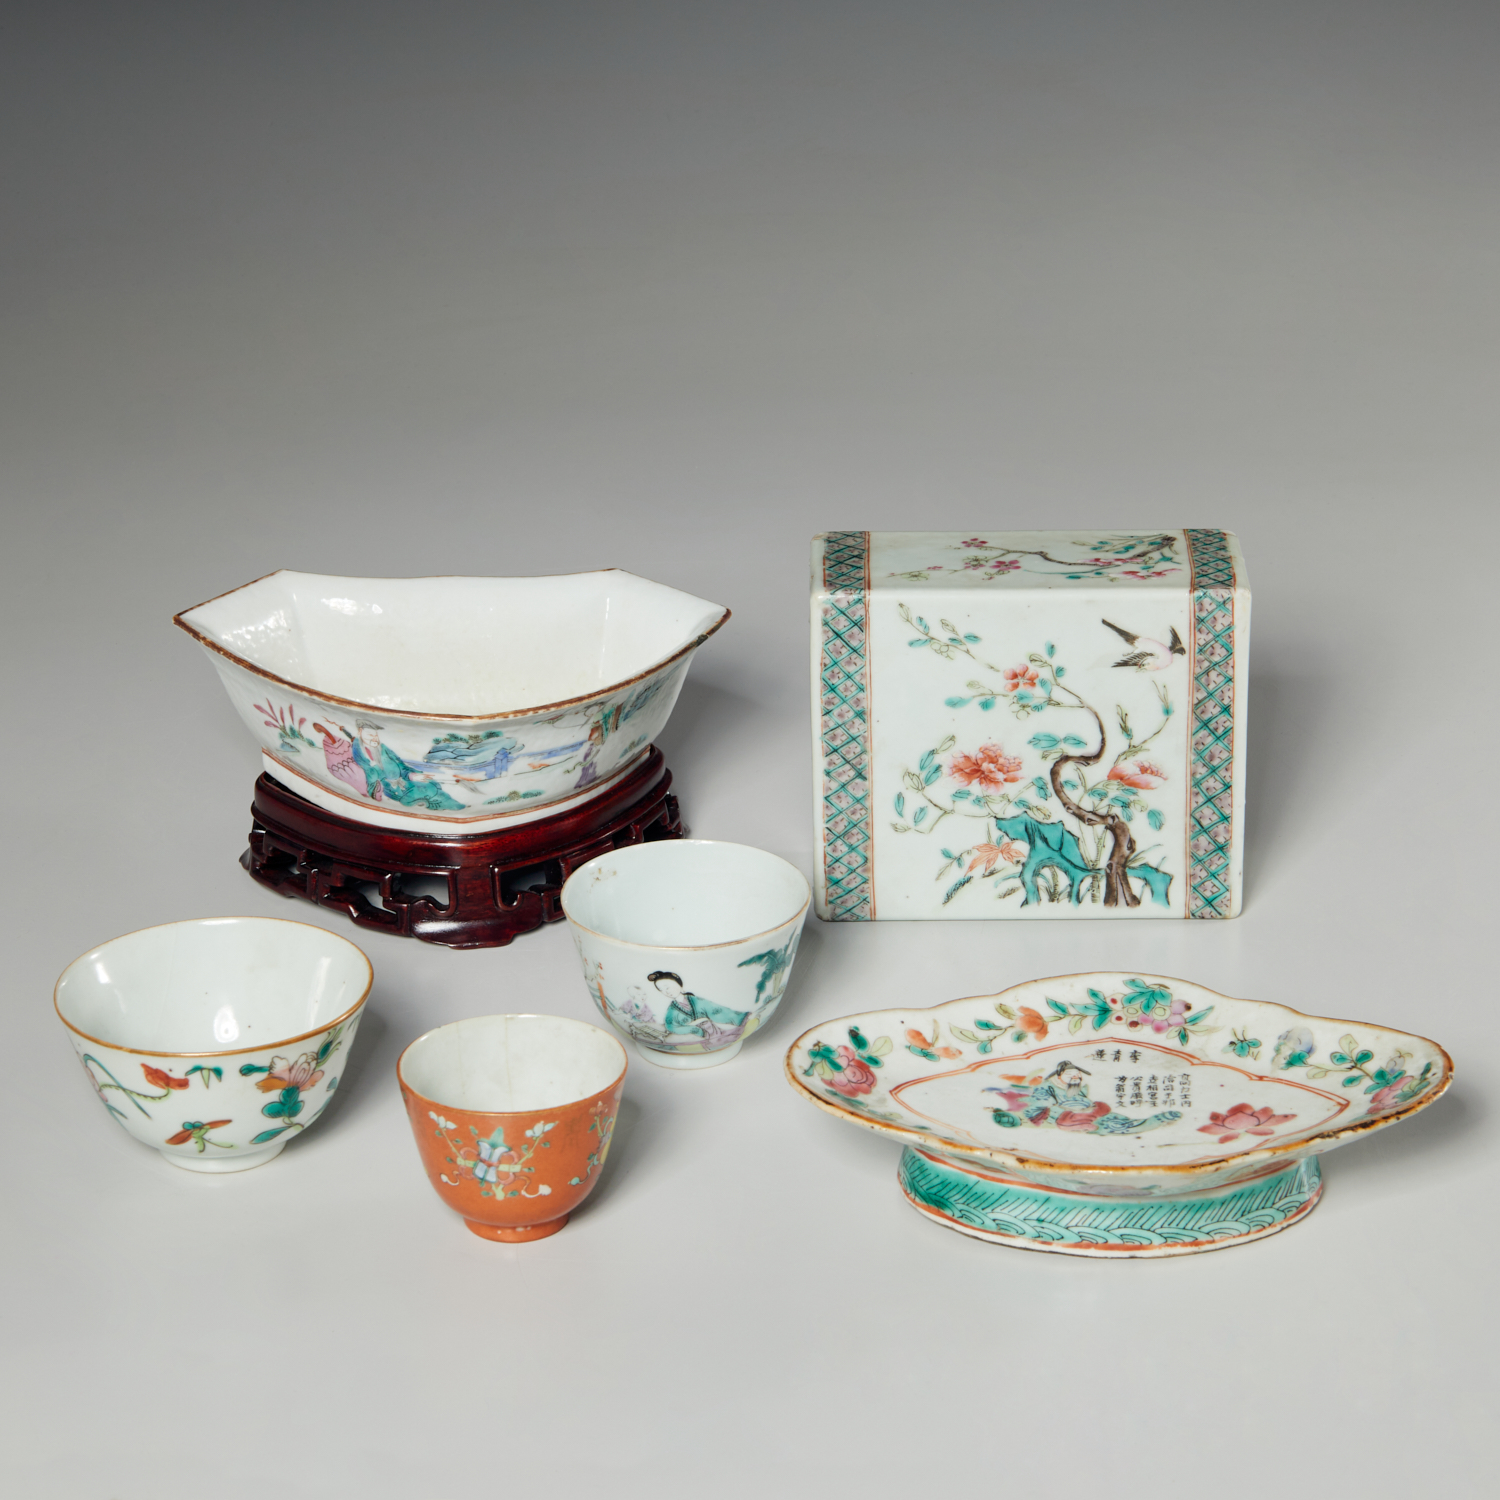 GROUP CHINESE QING ERA PORCELAINS 3611d4